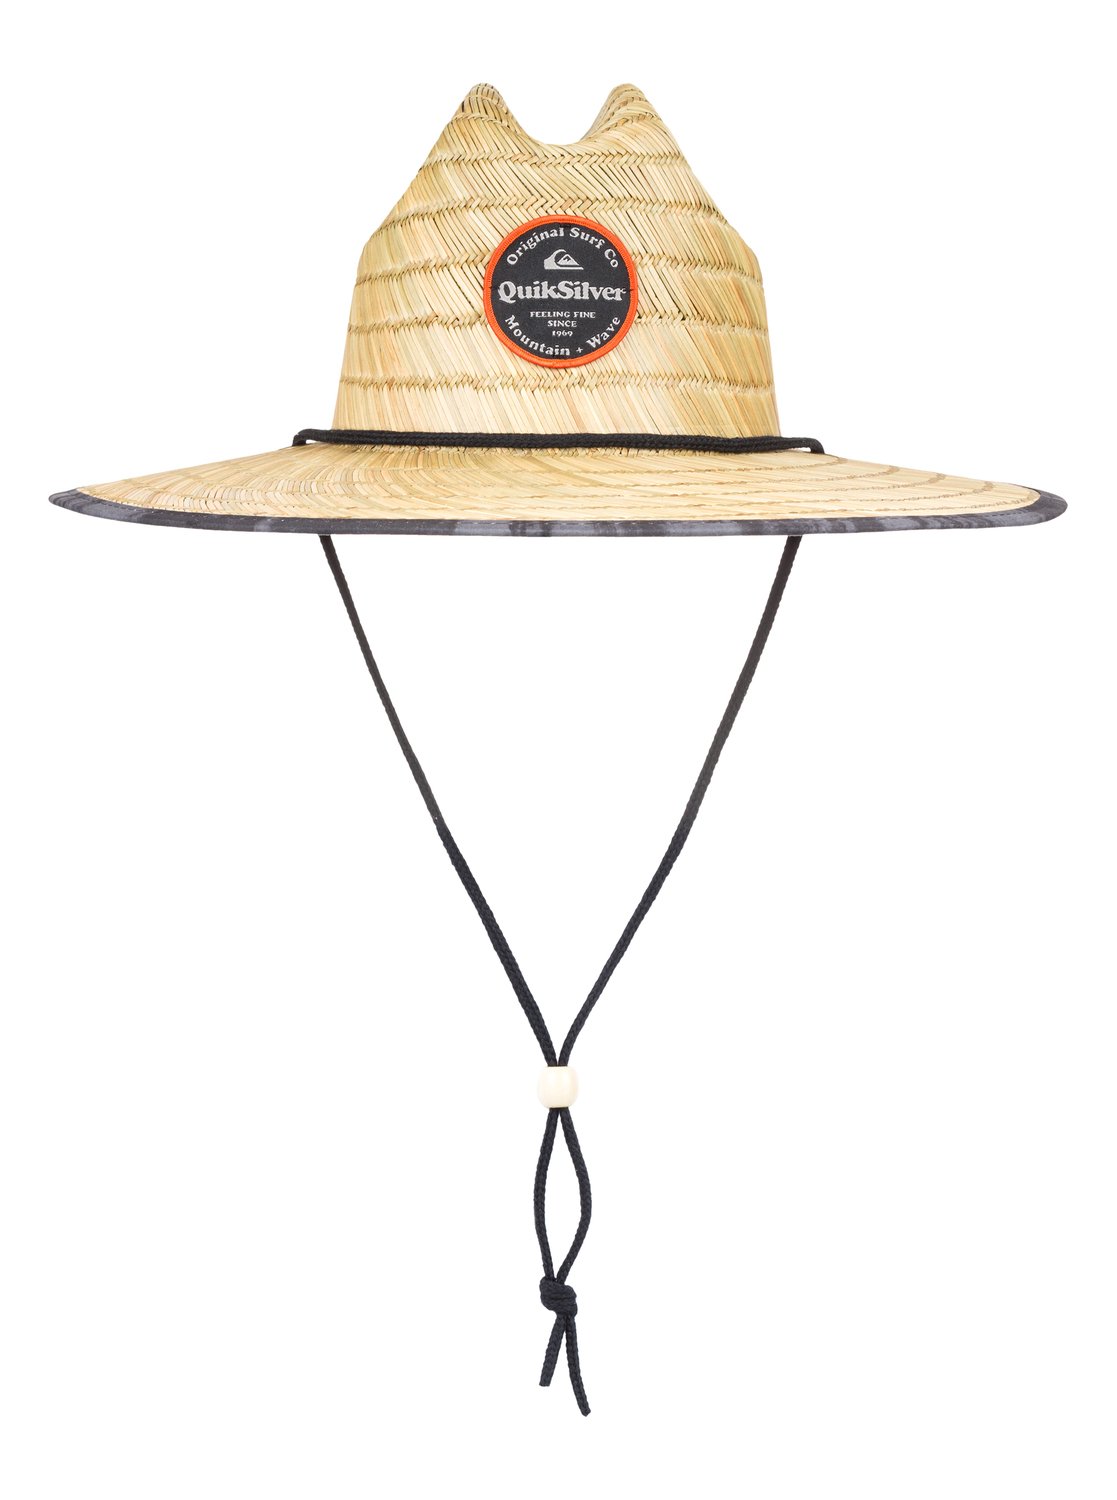 Quiksilver outsider Repent hat